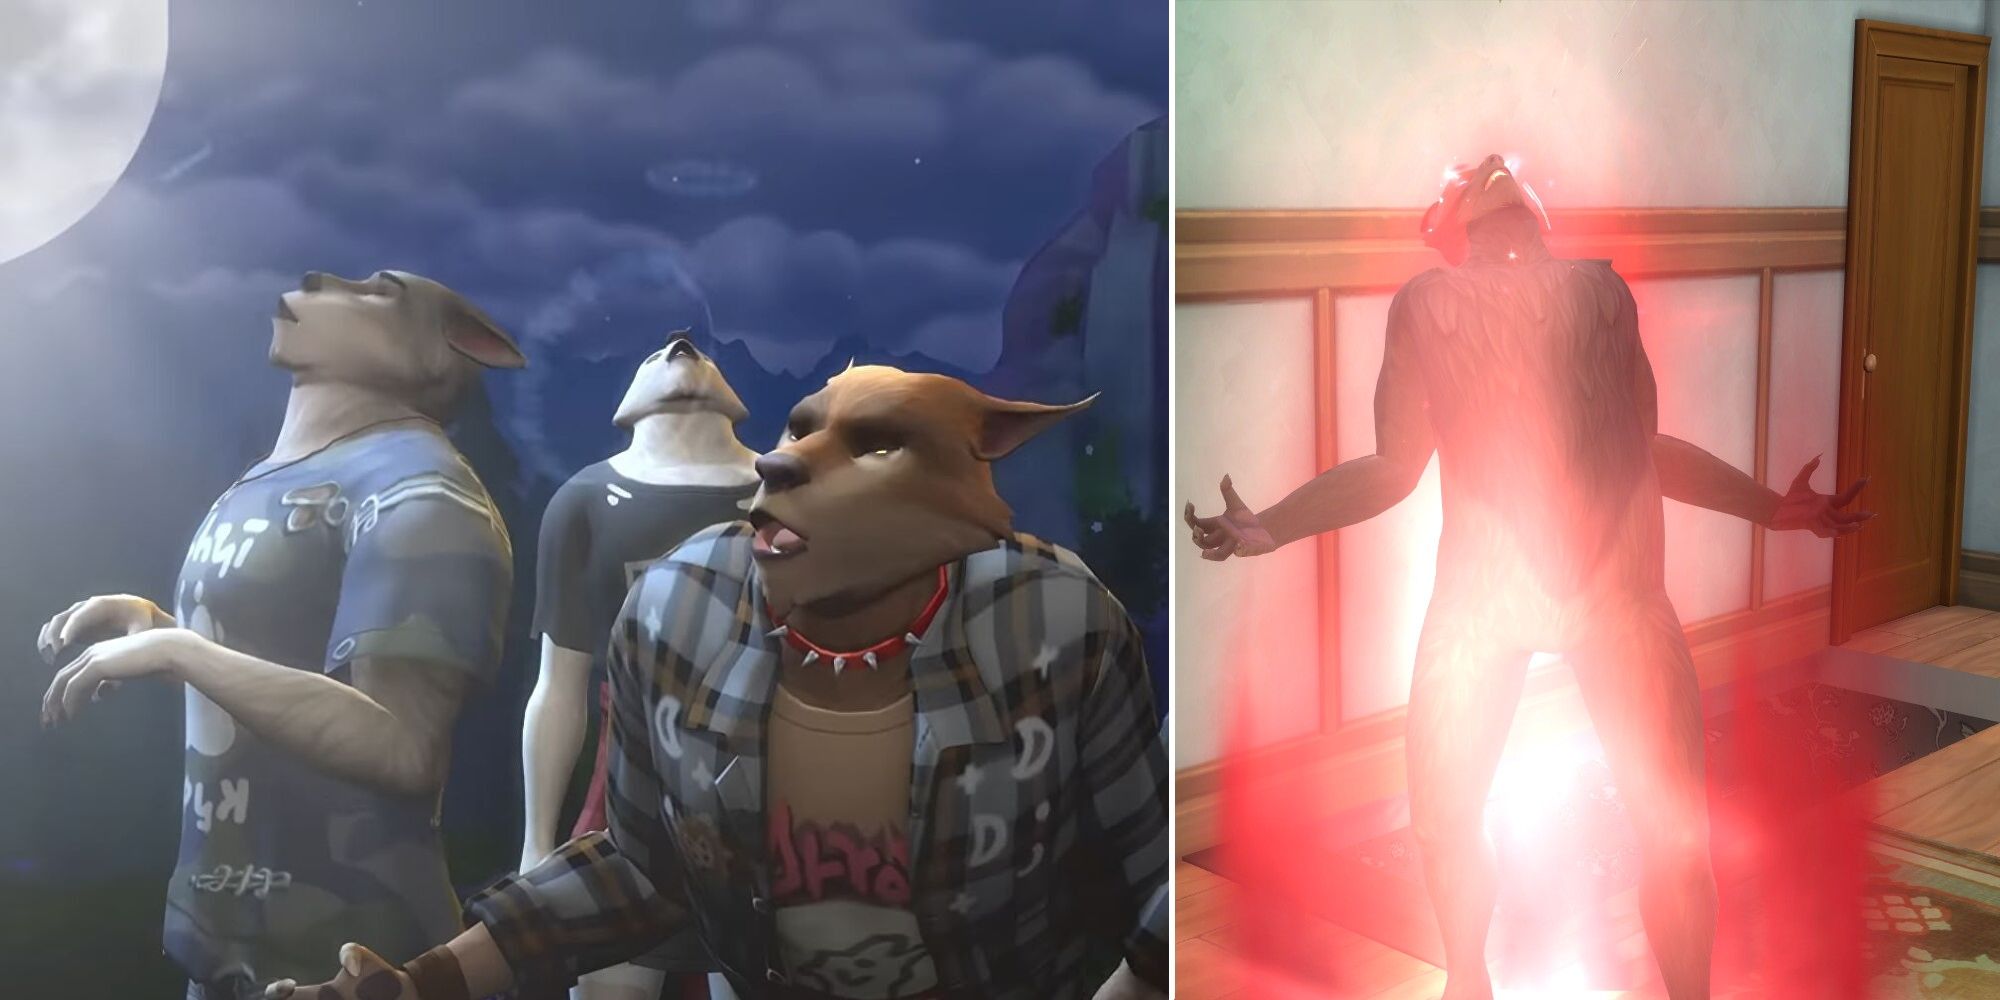 Werewolves howling at the moon and transforming in The Sims 4 Werewolves